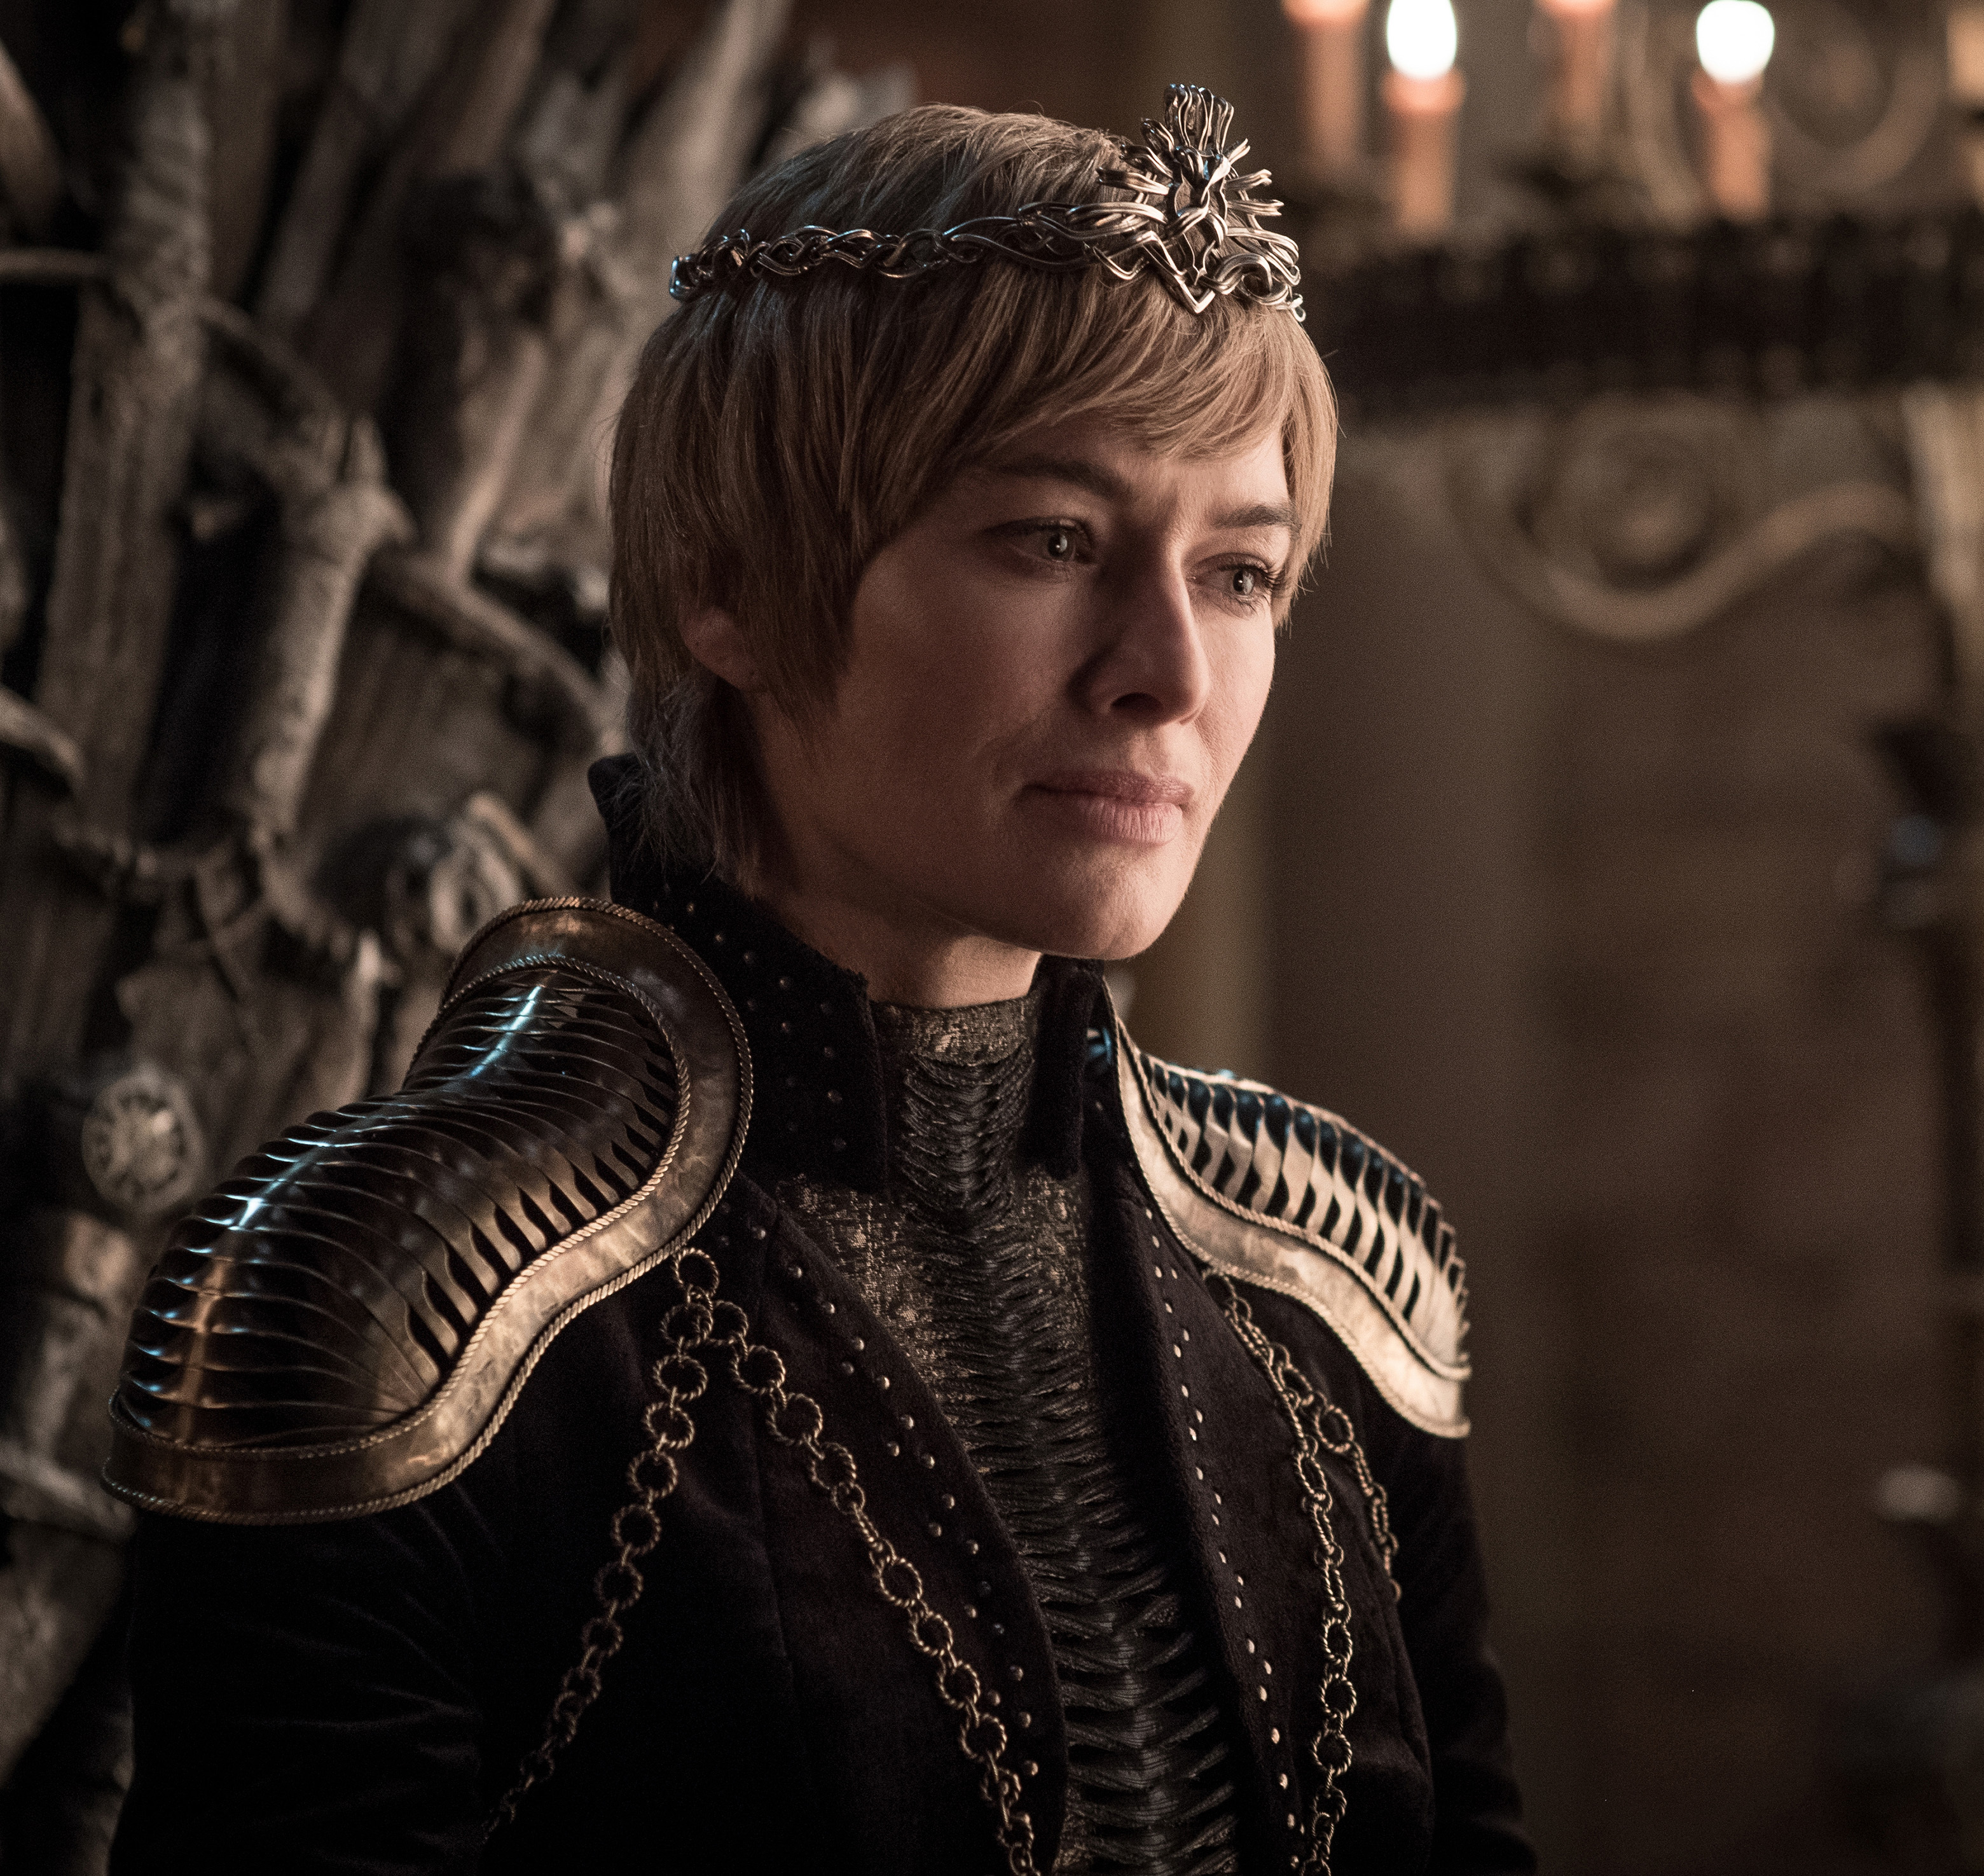 ⚔️ Only a True Maester Will Get 12/15 on This “Game of Thrones” Quotes Quiz cersei lannister played by lena headey the best anti hero on tv